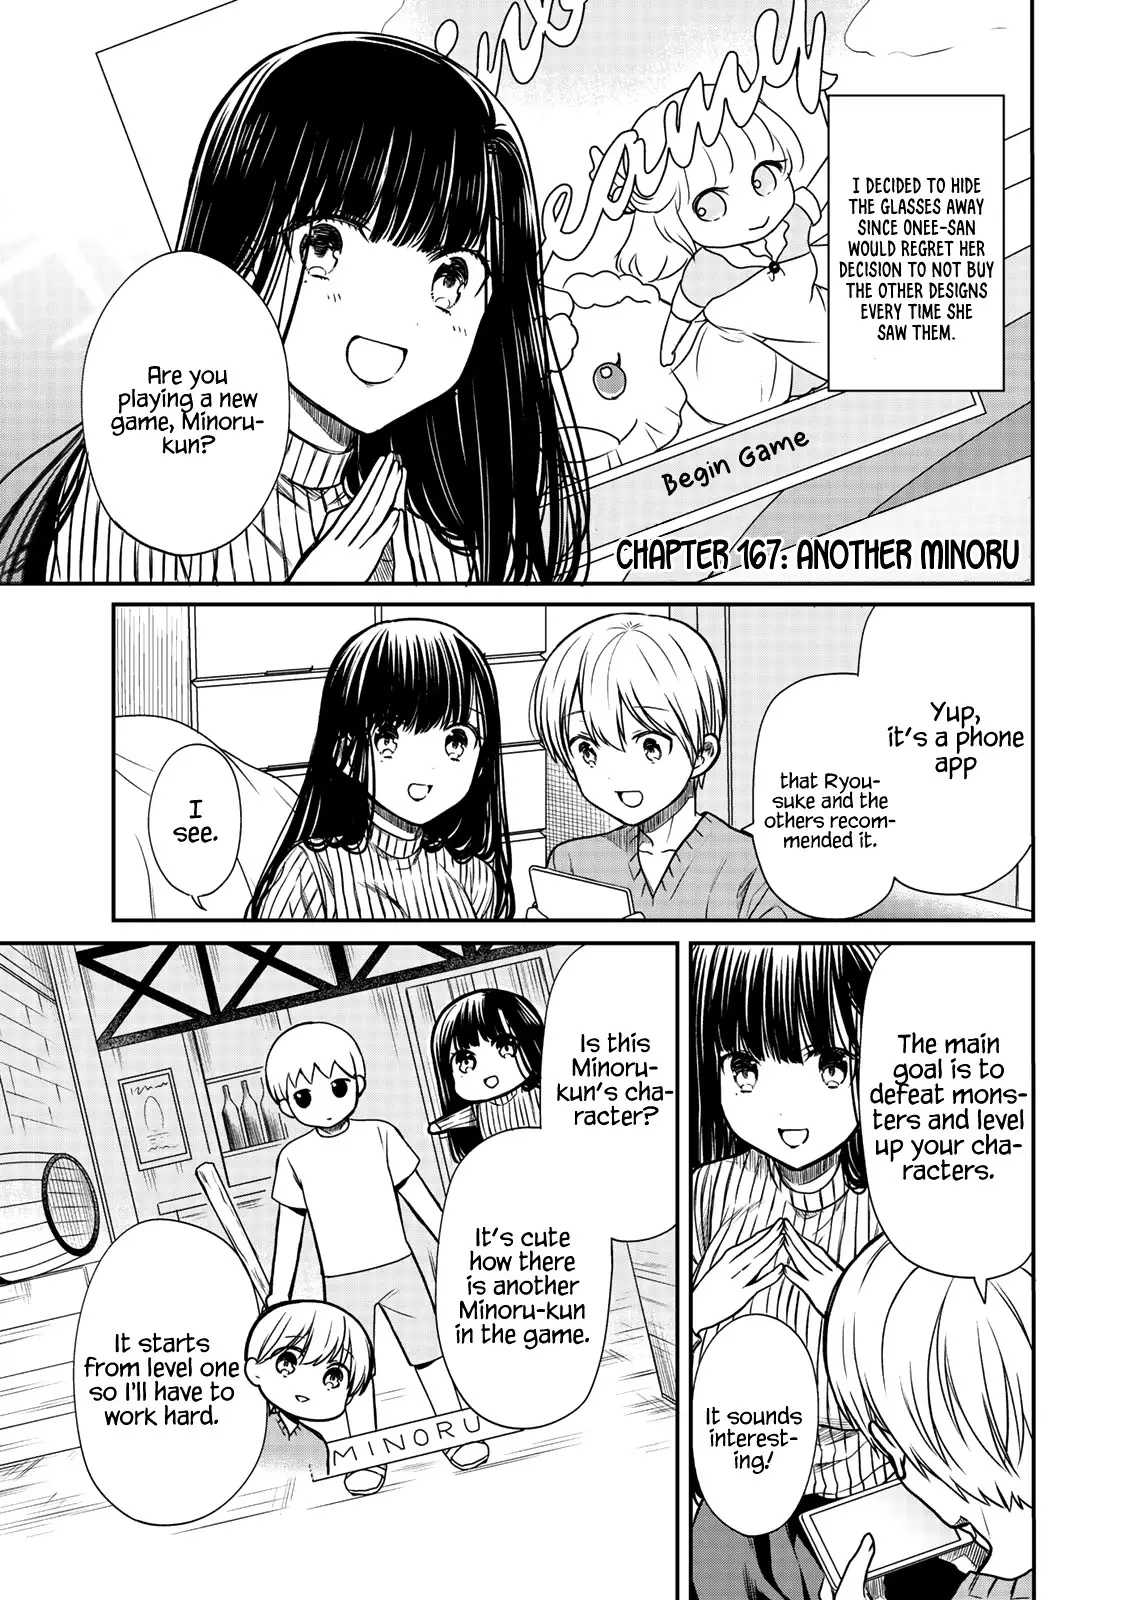 The Story Of An Onee-San Who Wants To Keep A High School Boy - 167 page 2